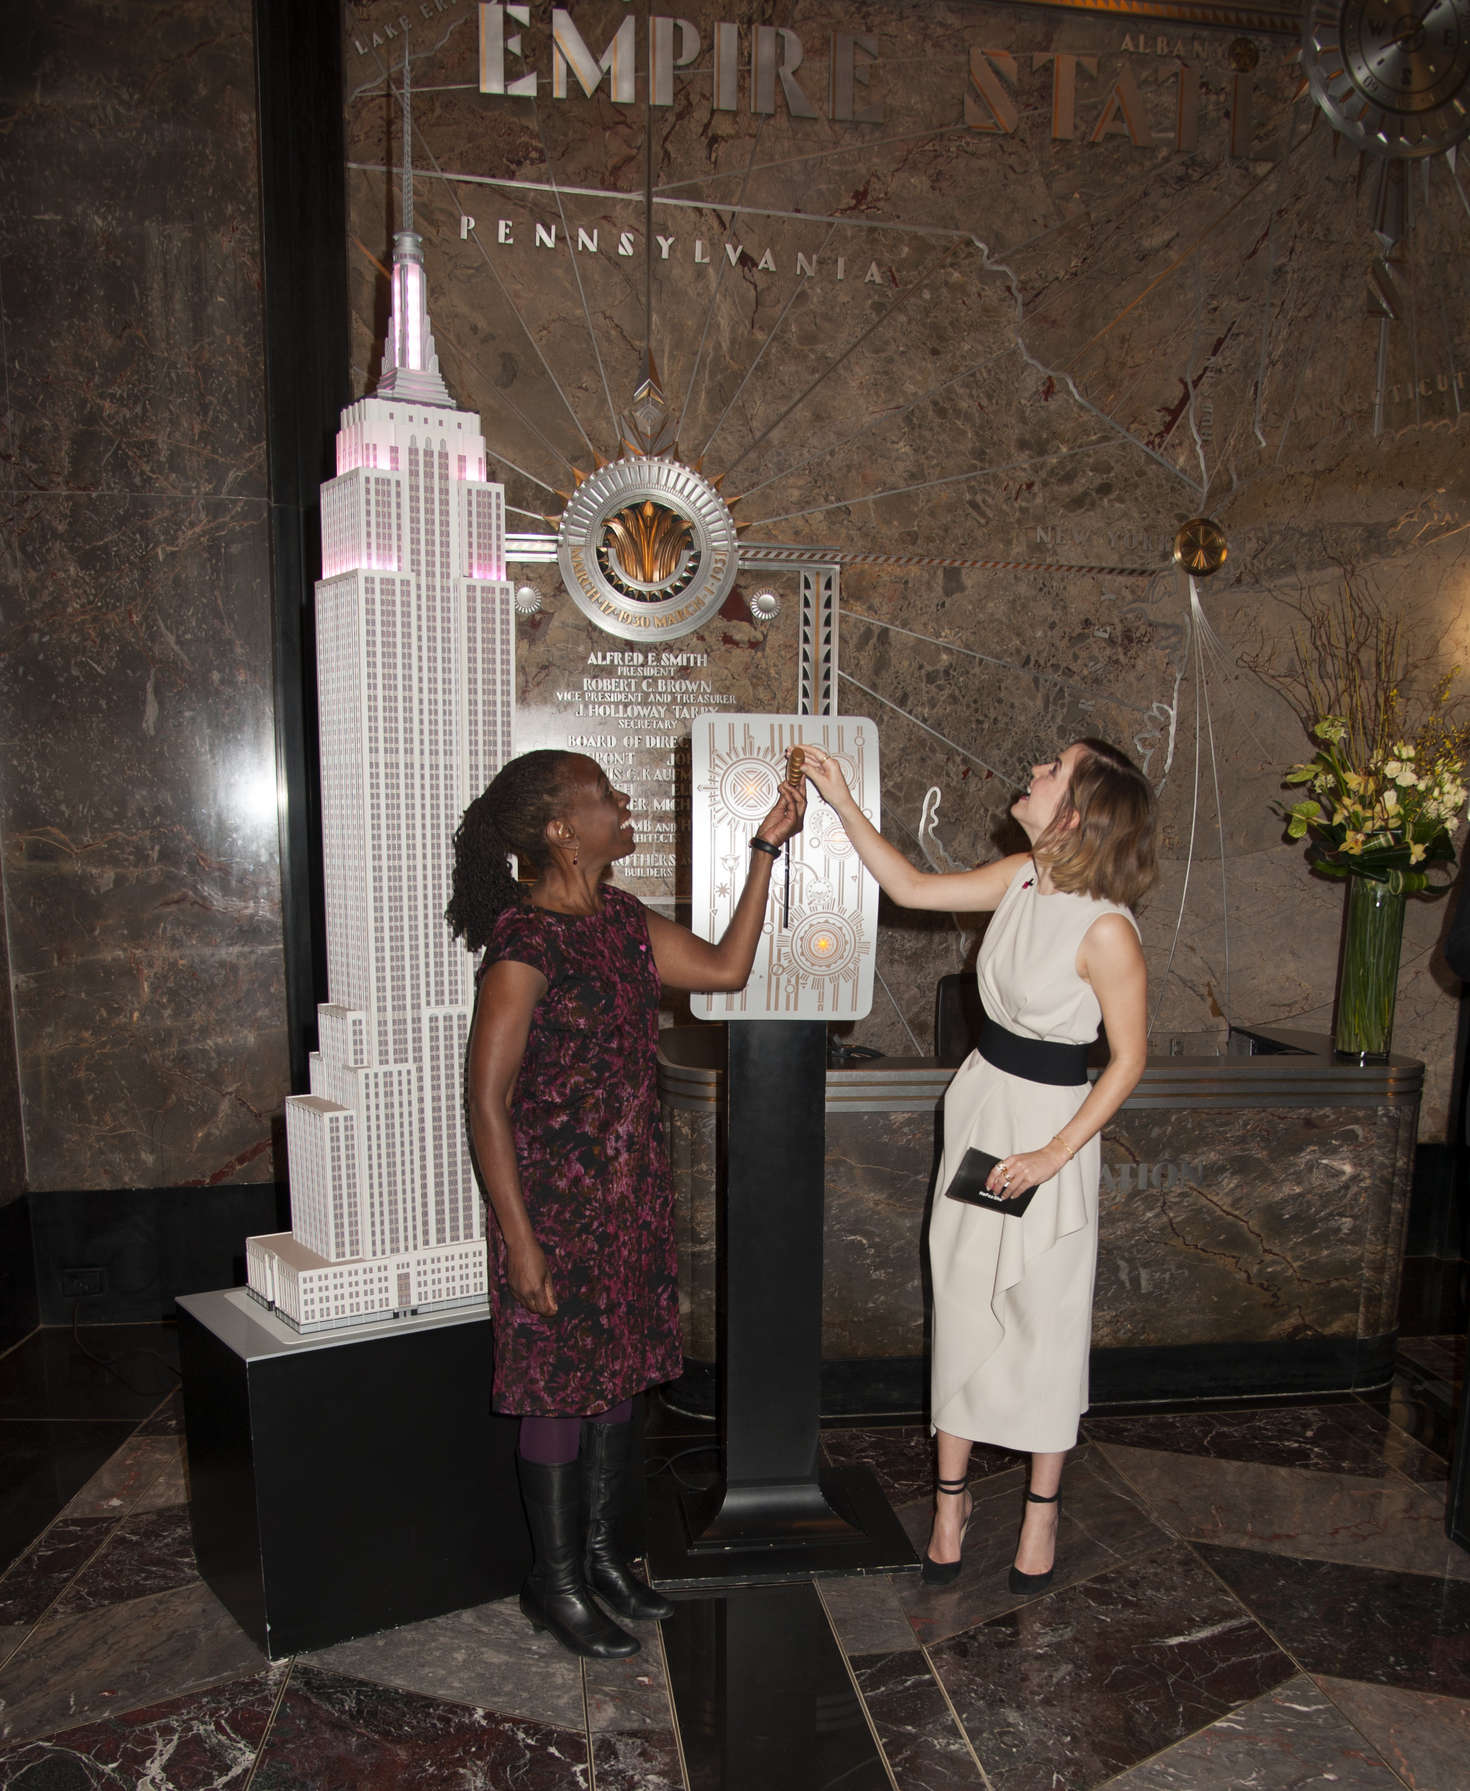 Emma Watson â€“ Lights The Empire State Building for International Womenâ€™s Day in NYC